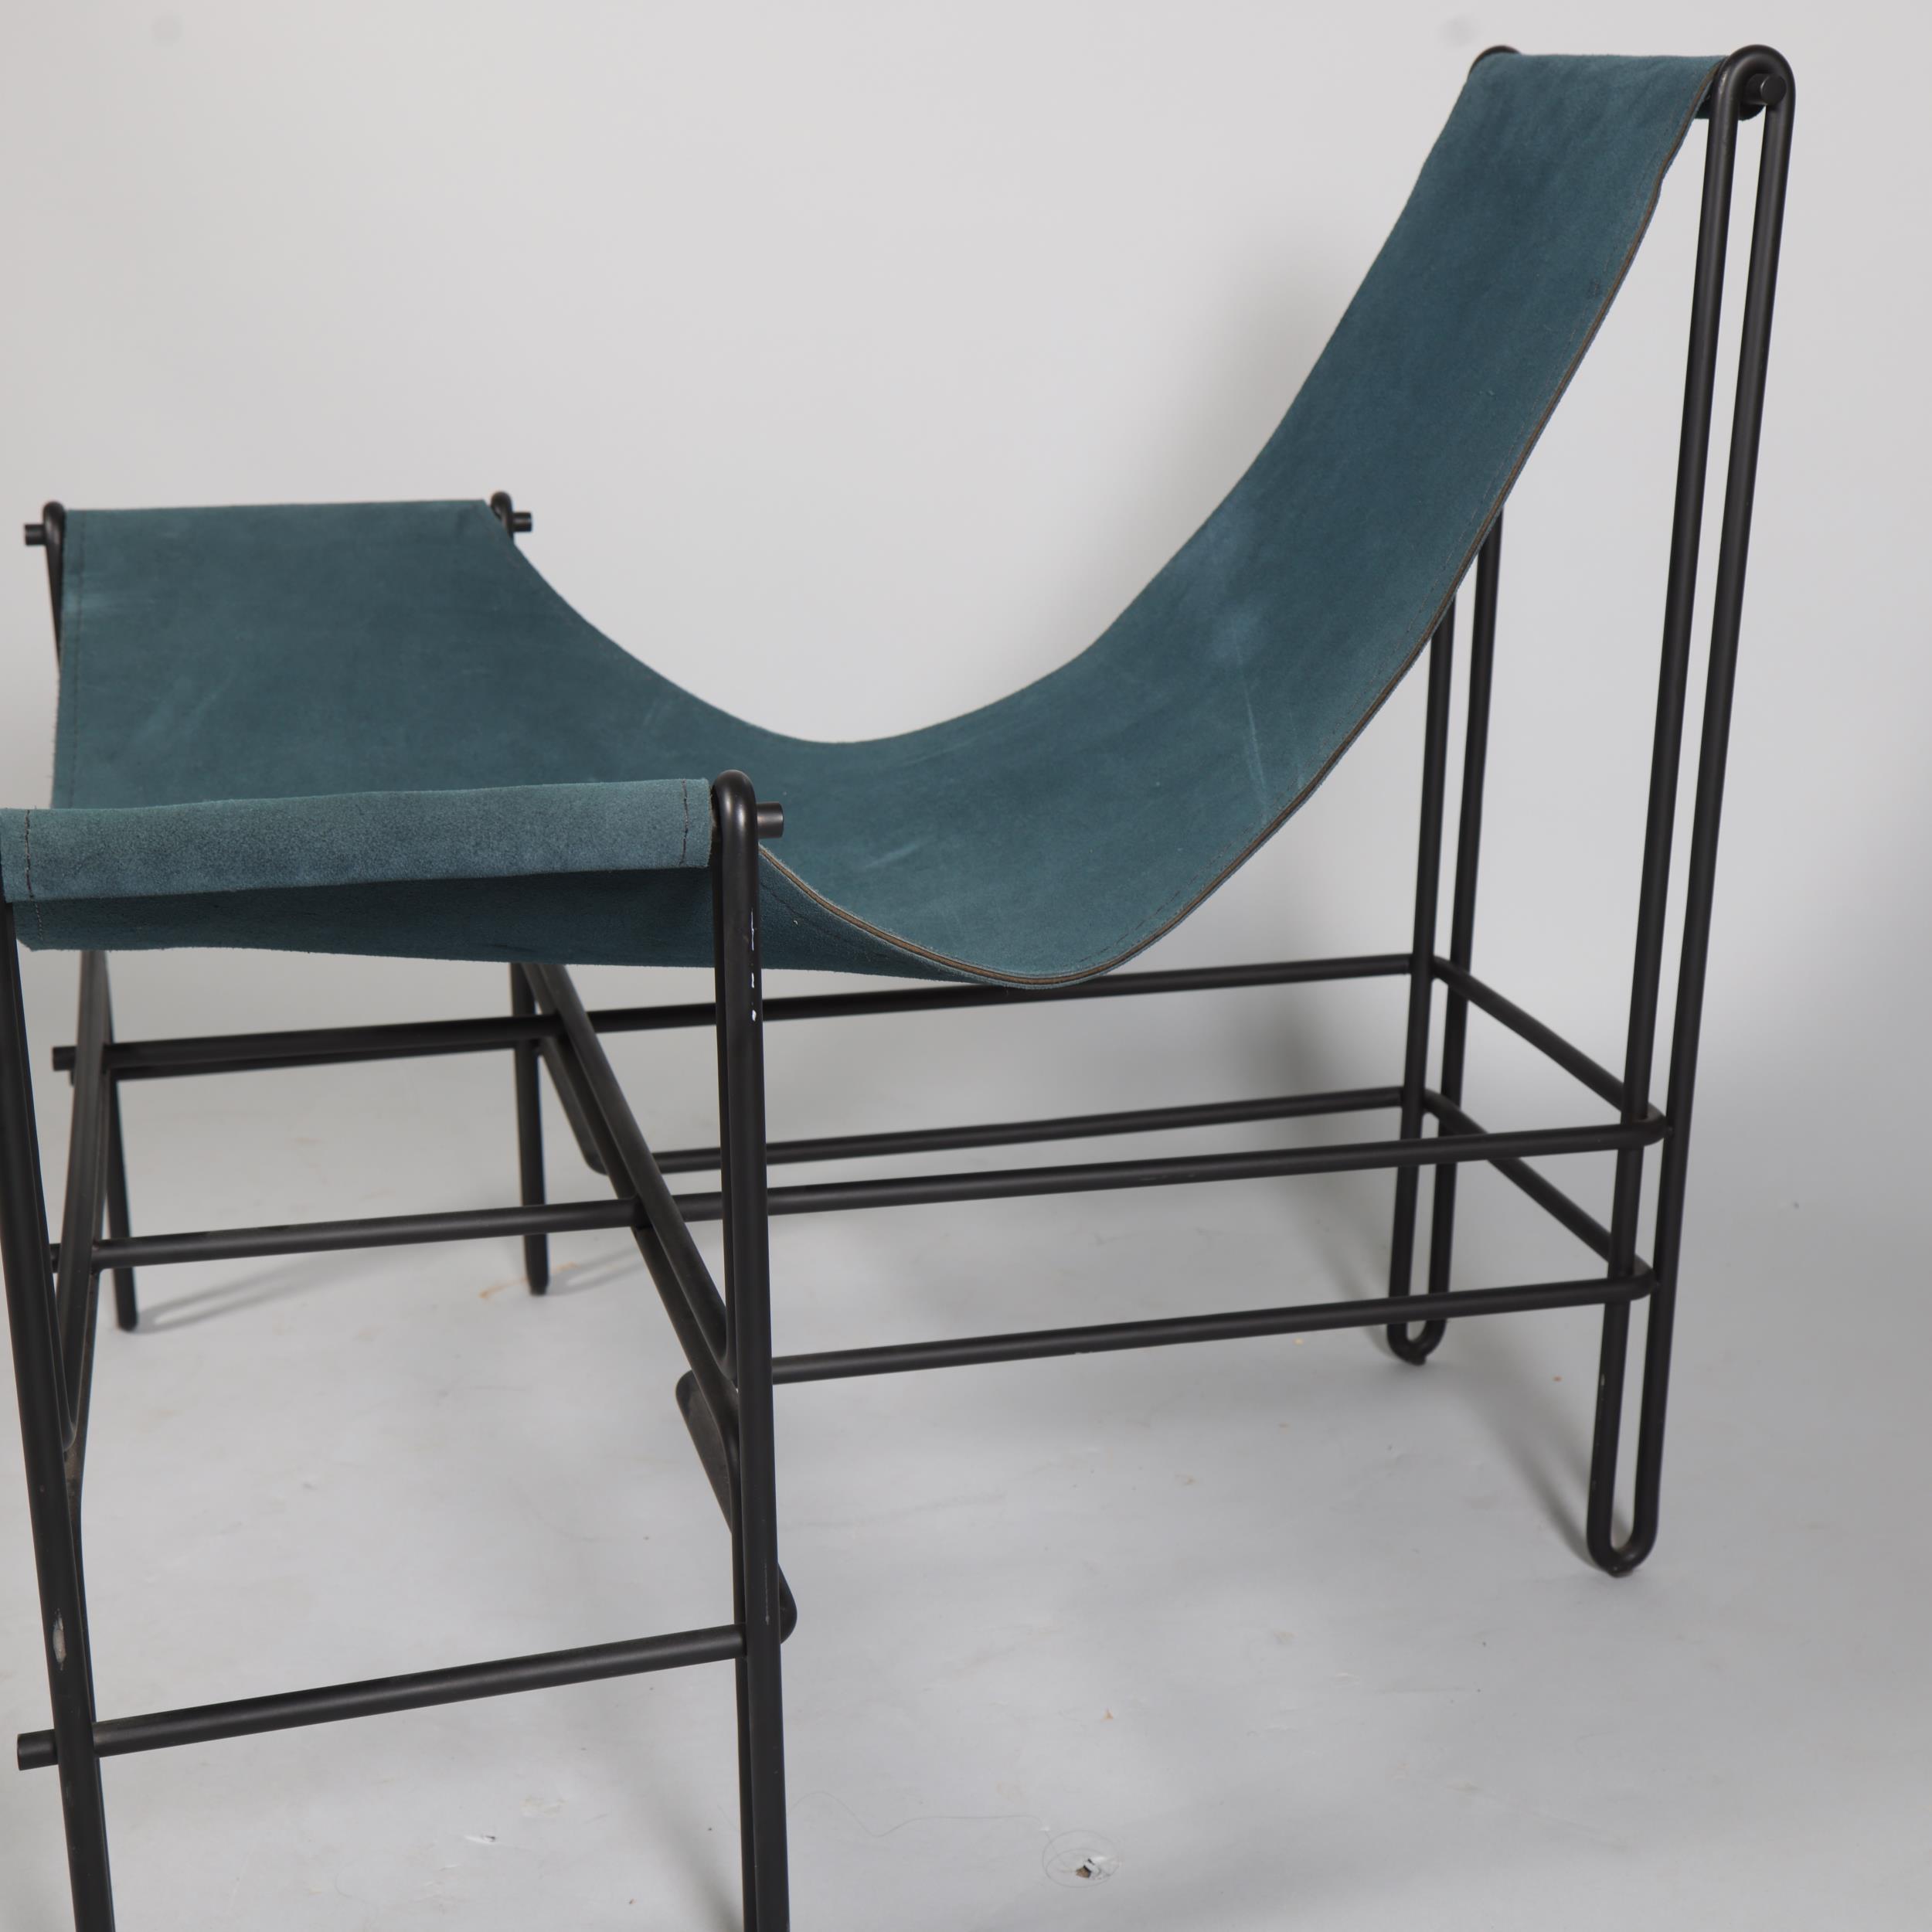 SAMUEL LAMAS, a Brazilian Bia lounge chair, the suede leather seat slung on a stylish paperclip - Image 2 of 4